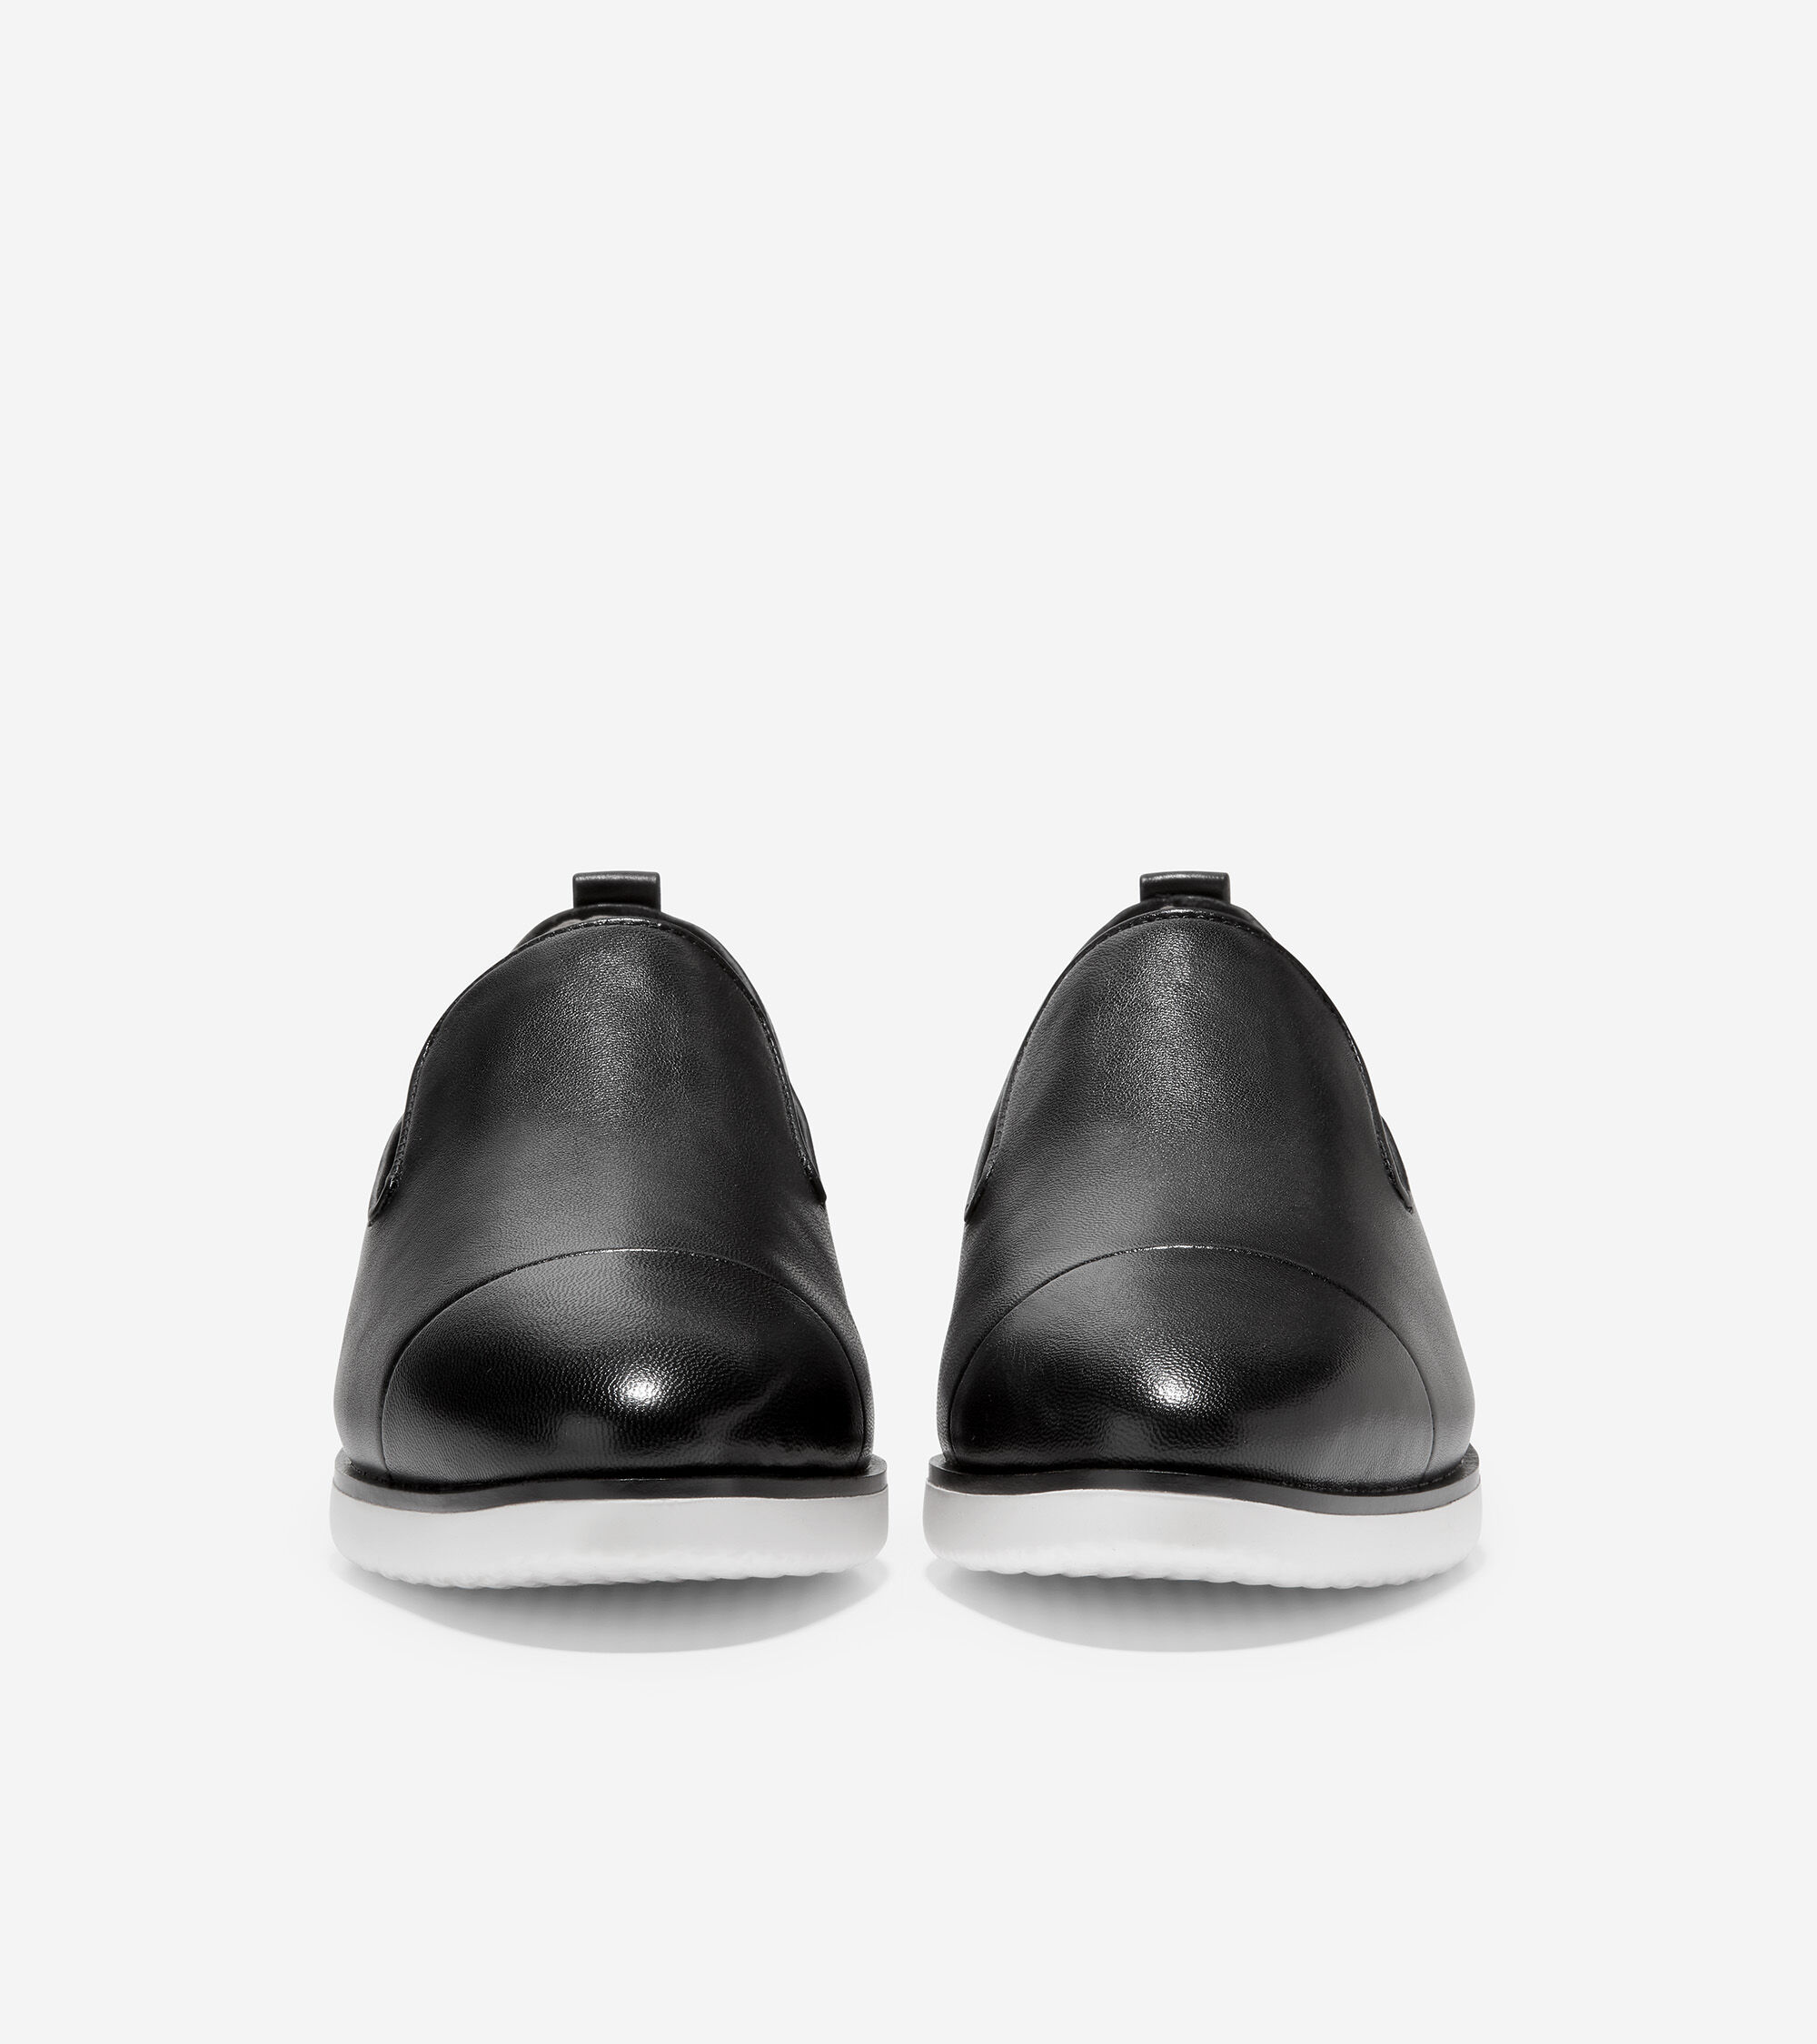 patent leather slip on shoes